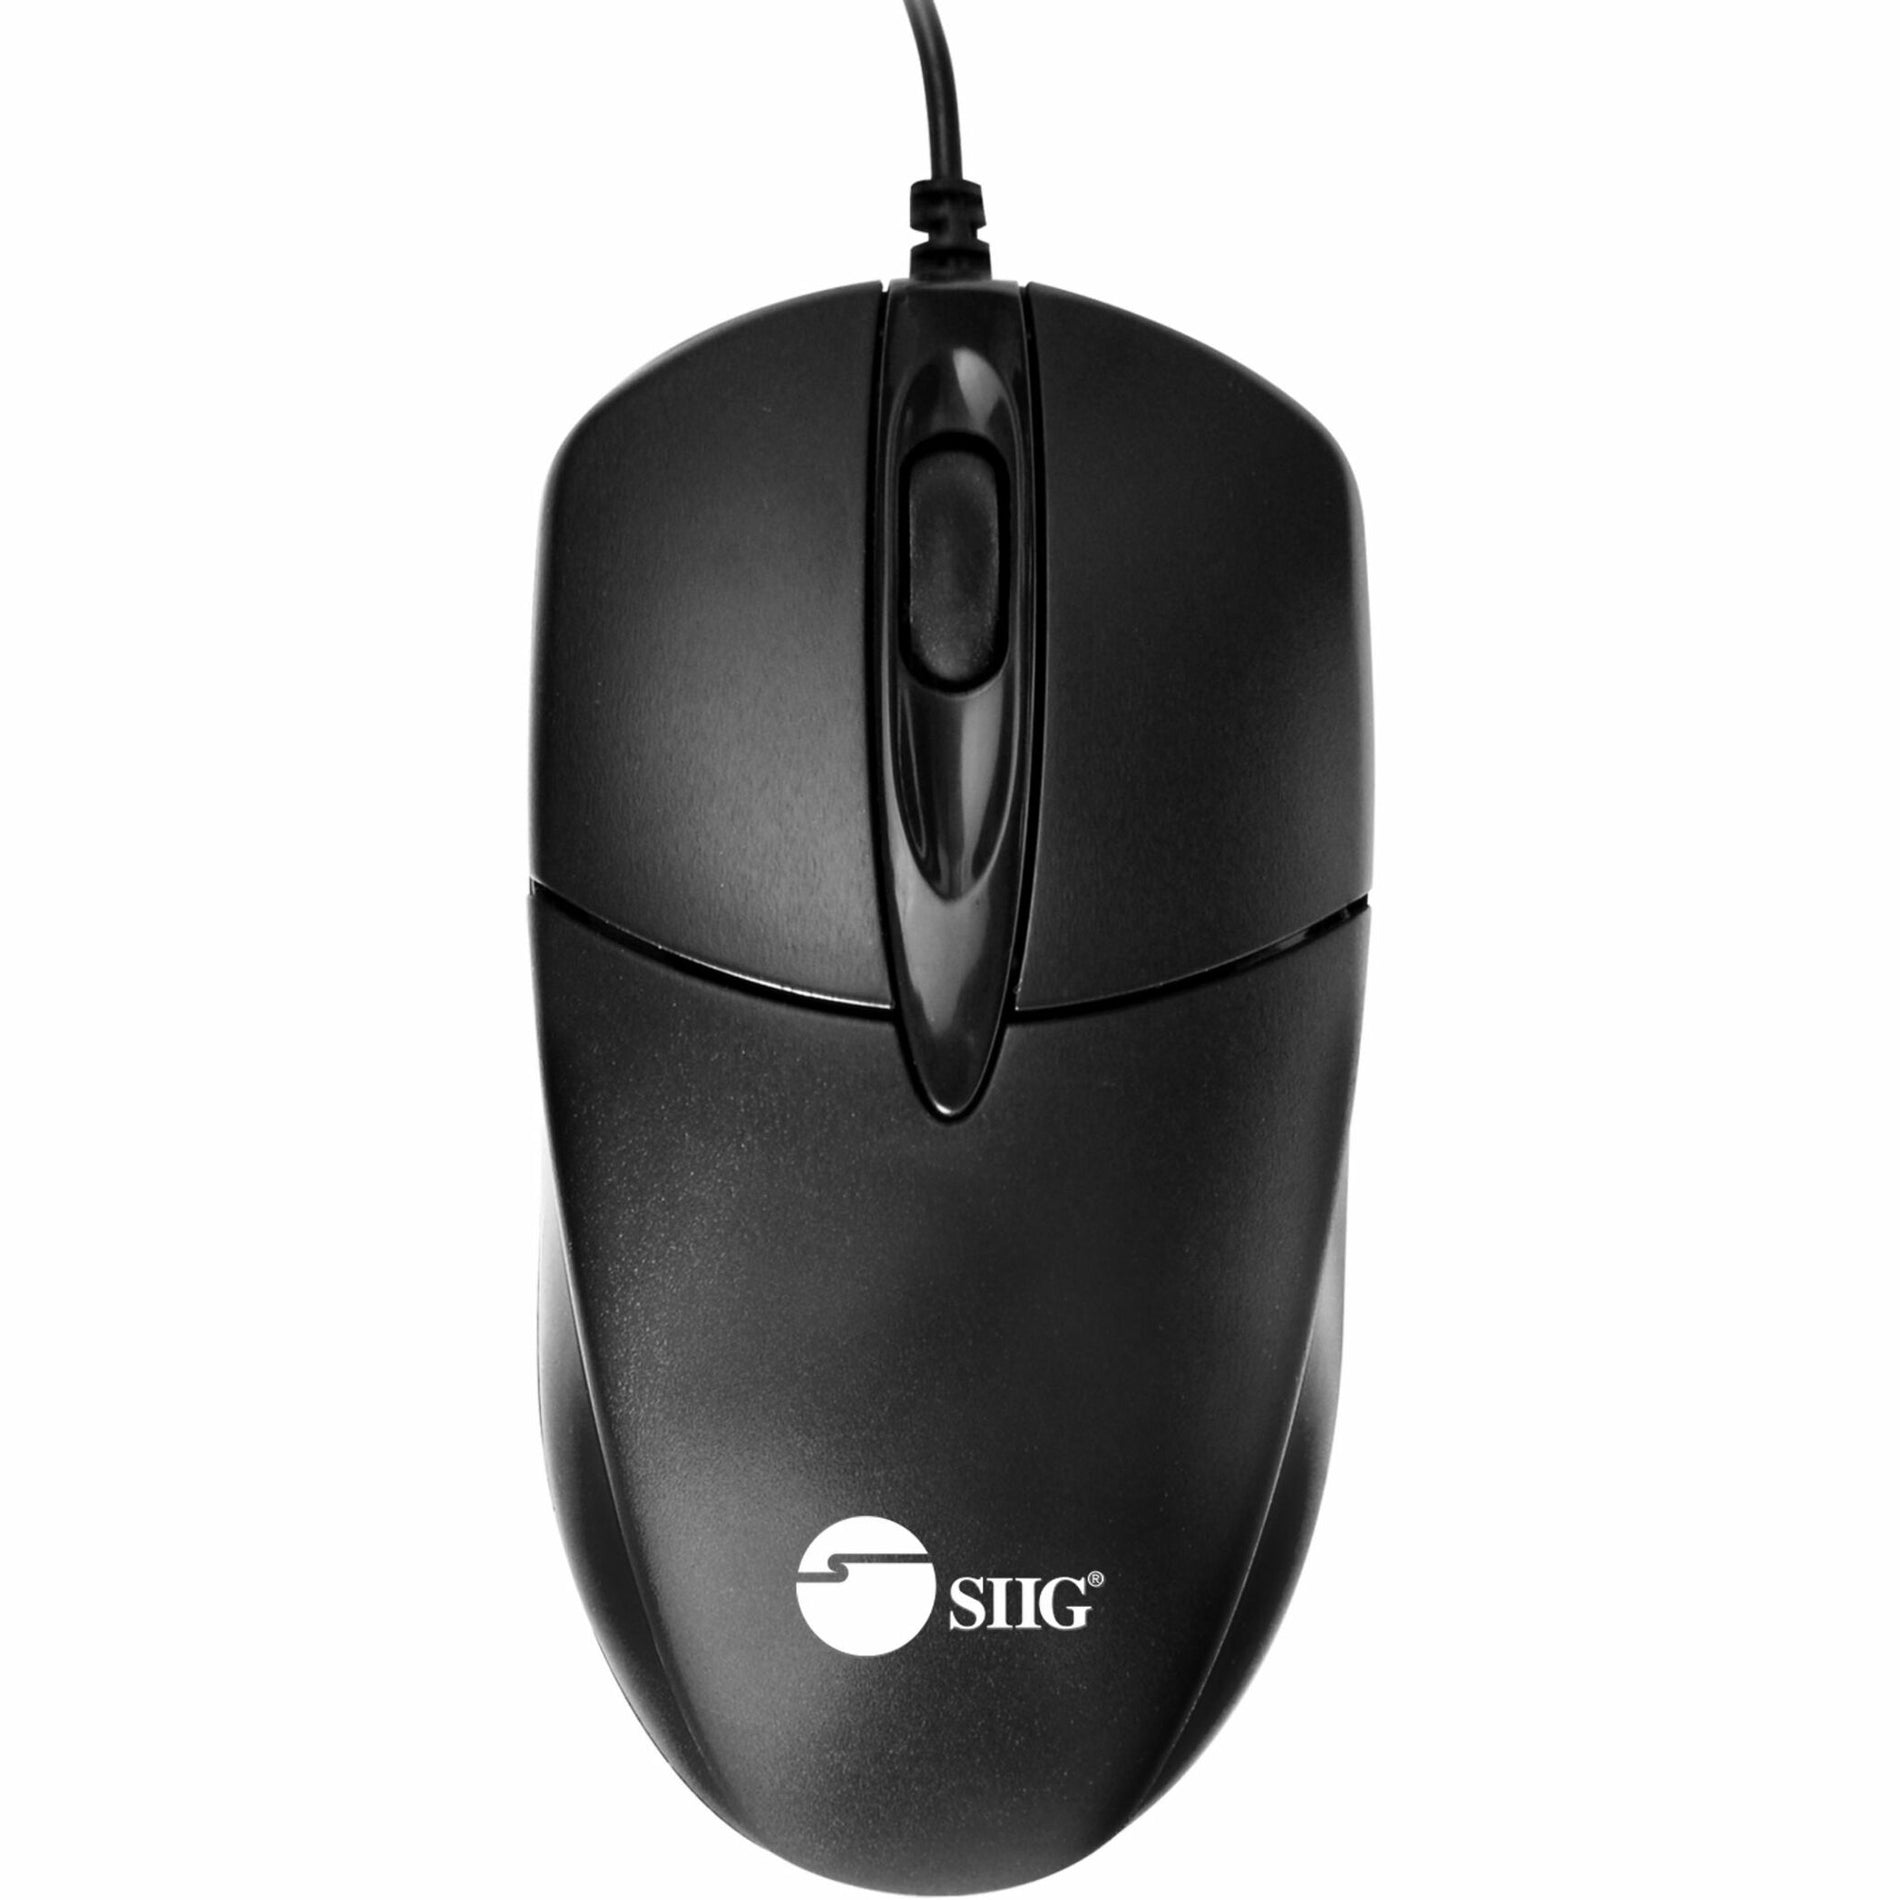 SIIG JK-US0T11-S1 3 Buttons USB Optical Mouse, Ergonomic Fit, 1200 dpi, Scroll Wheel